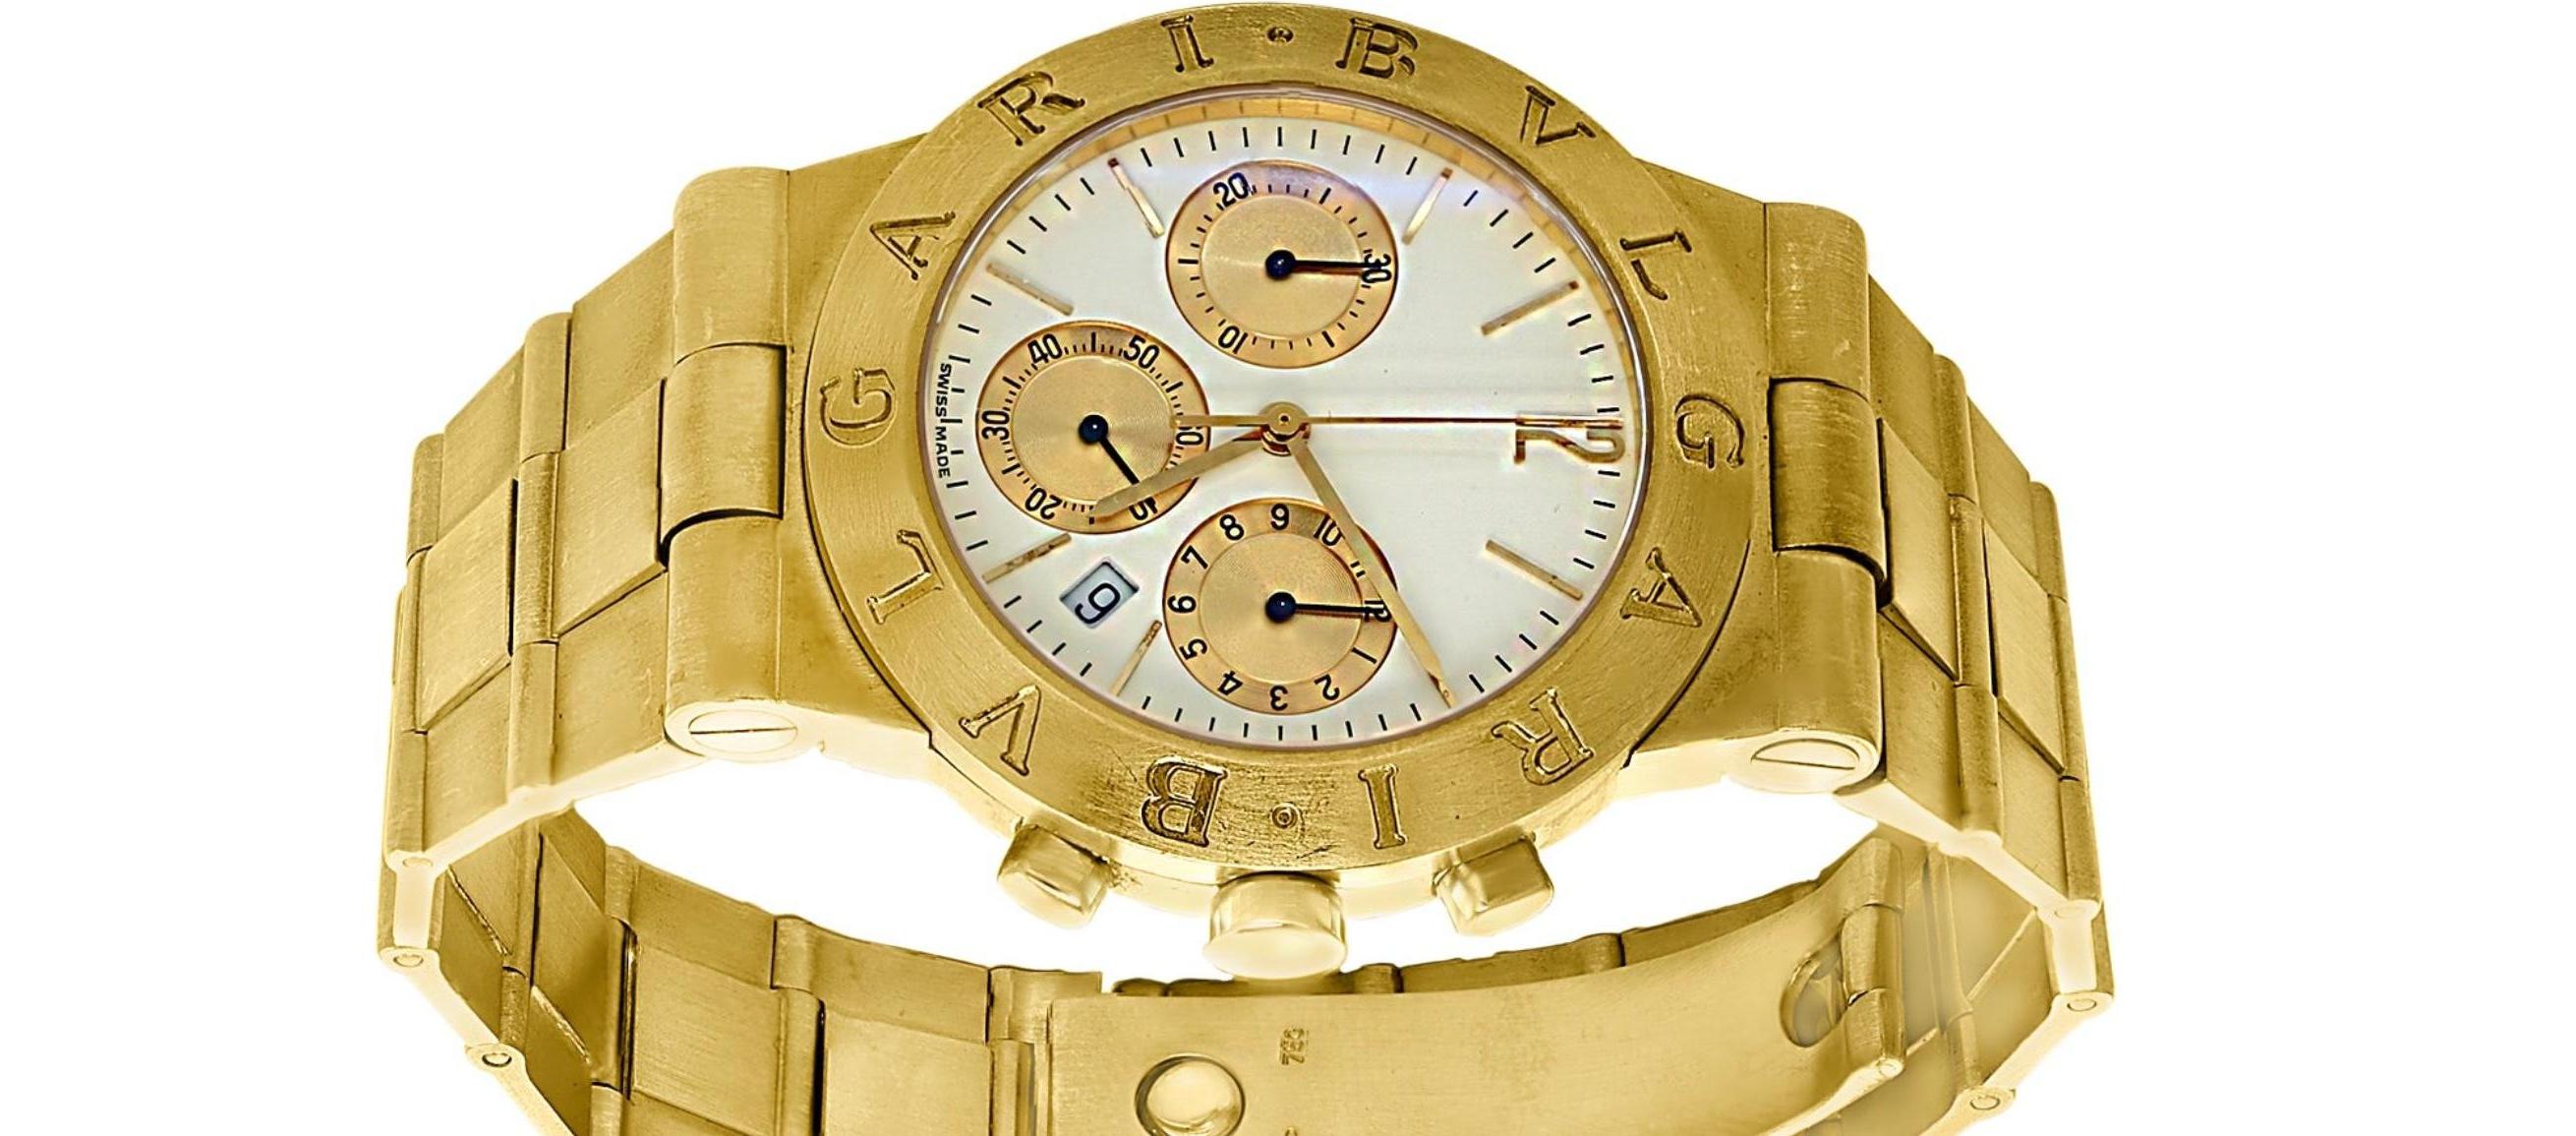 This is A Unisex Bvlgari Chronograph 18K Solid Yellow  Gold WATCH
Brand	Bvlgari
Gold weight with the movement 165 gm
Case material	 18 Karat solid  Yellow gold
Bracelet material	 18 Karat Solid Yellow Gold
Gender	Men's watch/Unisex
Movement	Battery